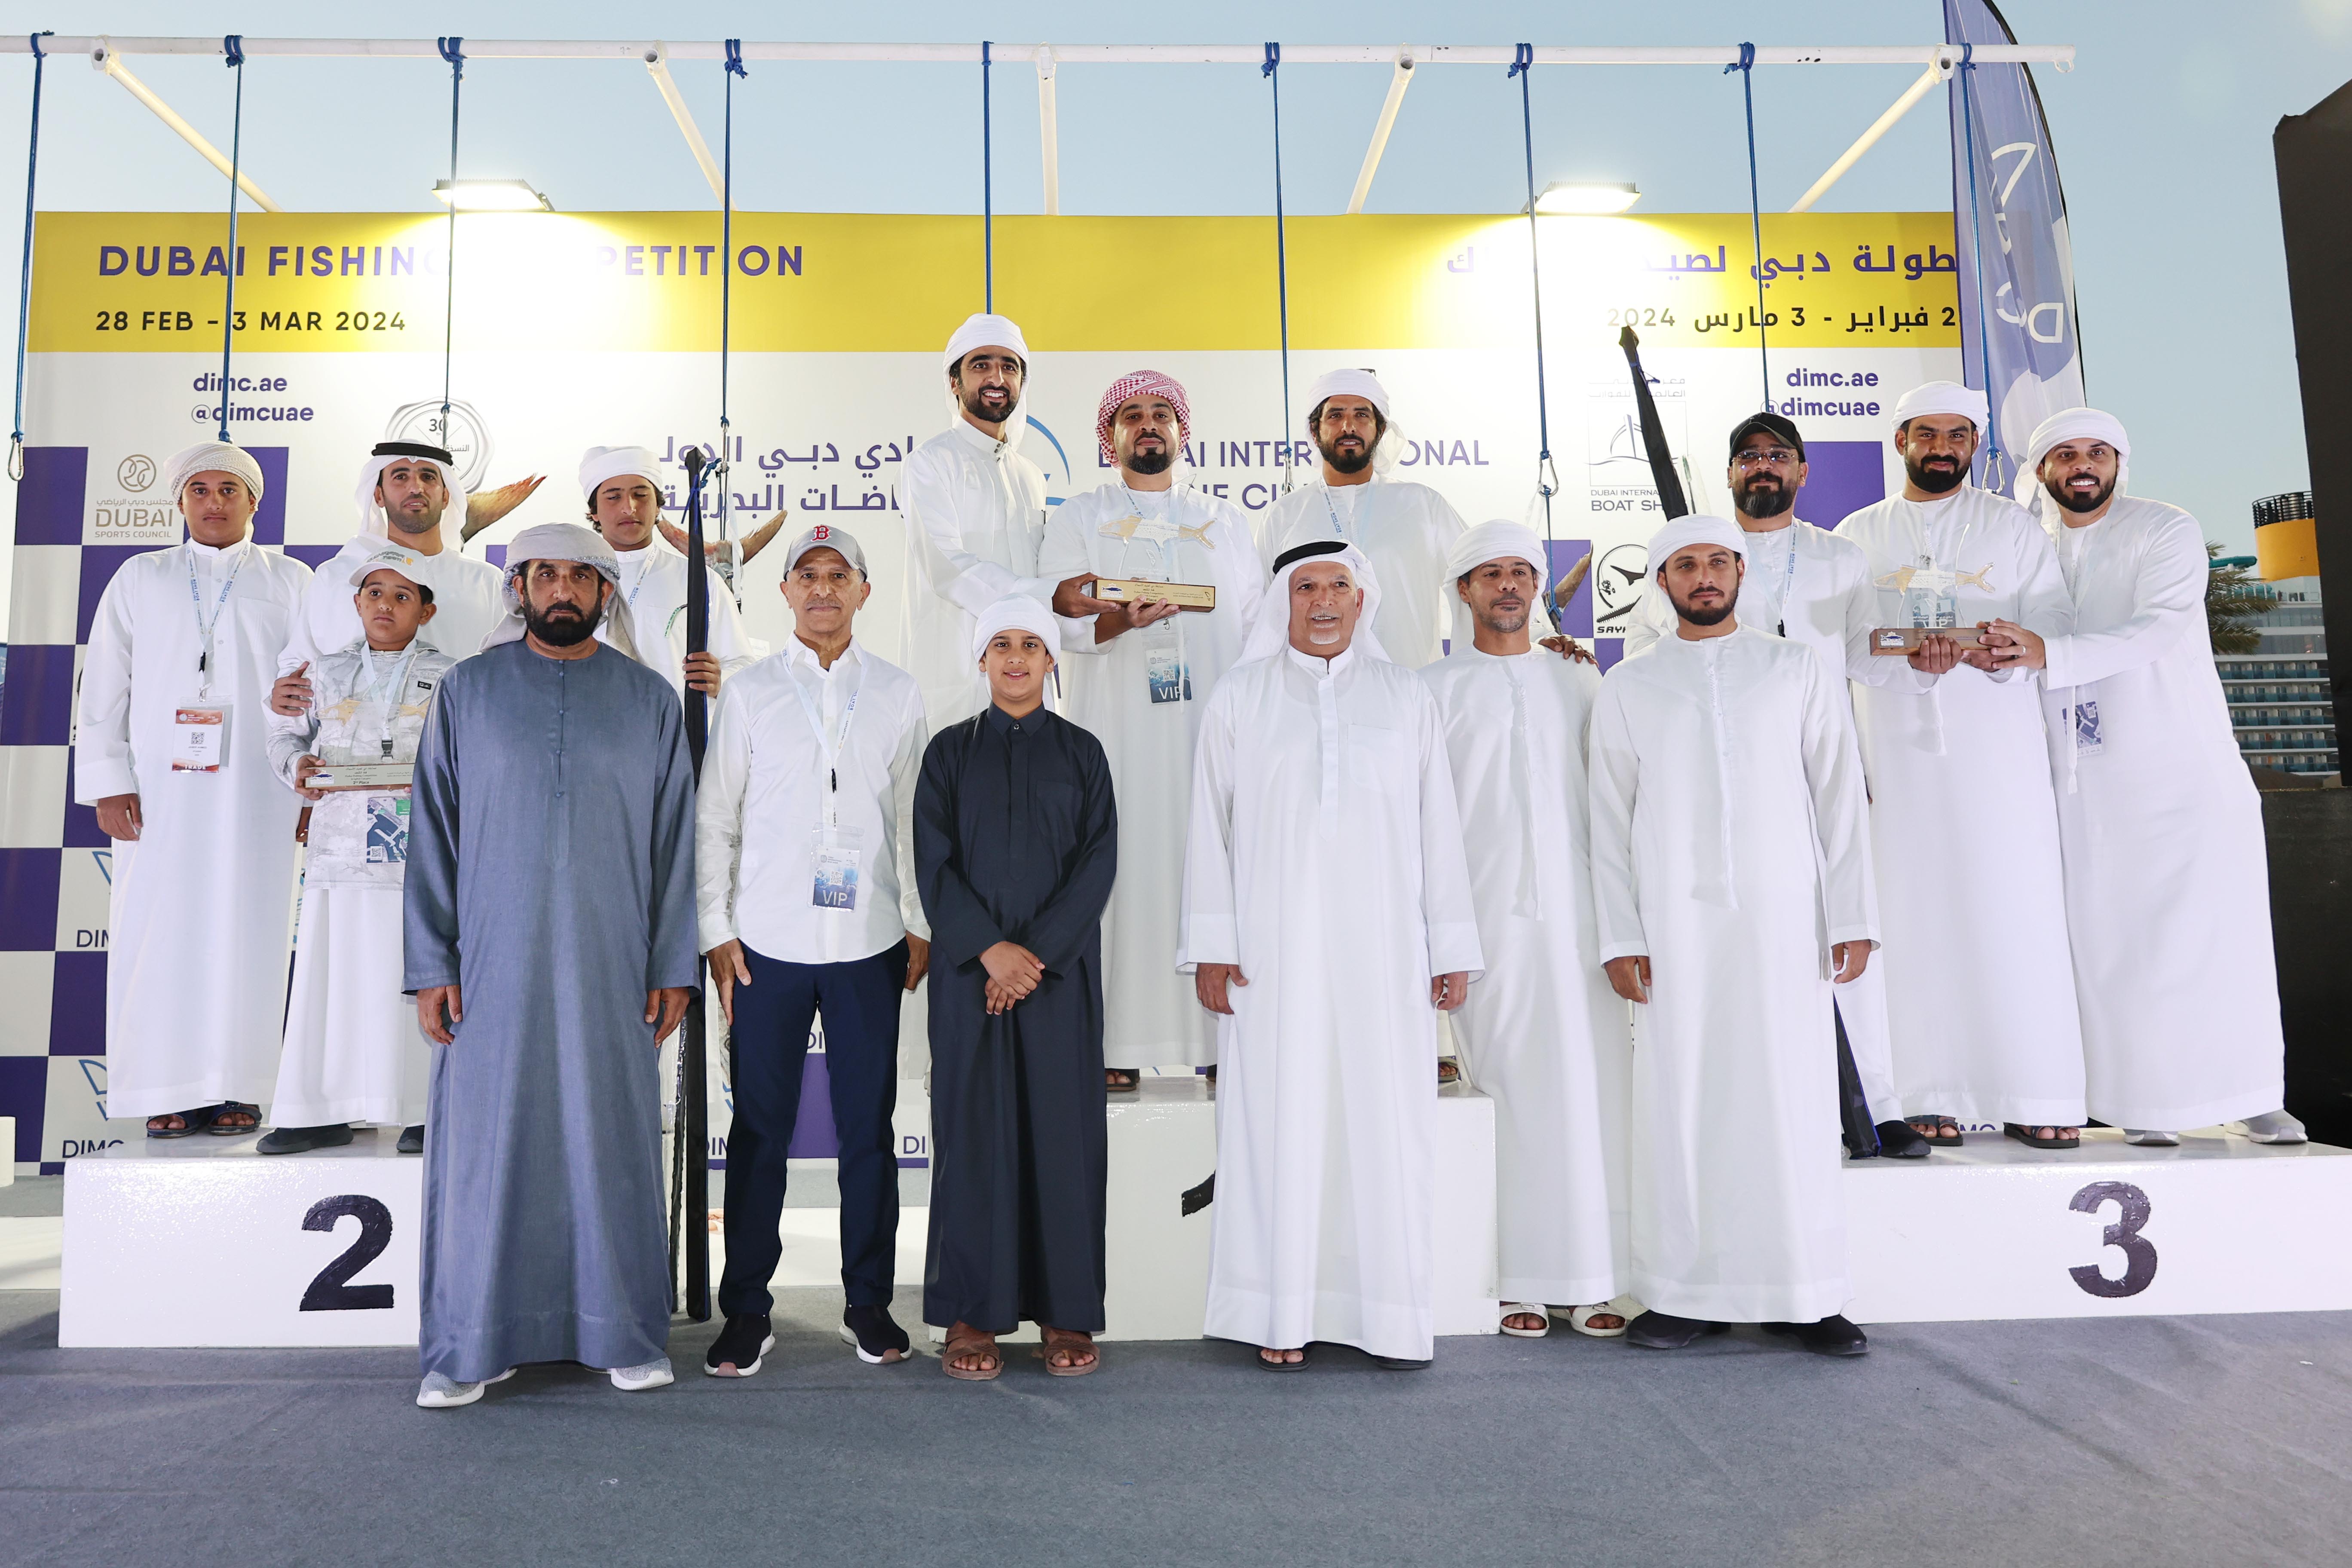 Successful Conclusion of the Dubai Fishing Competition 2024